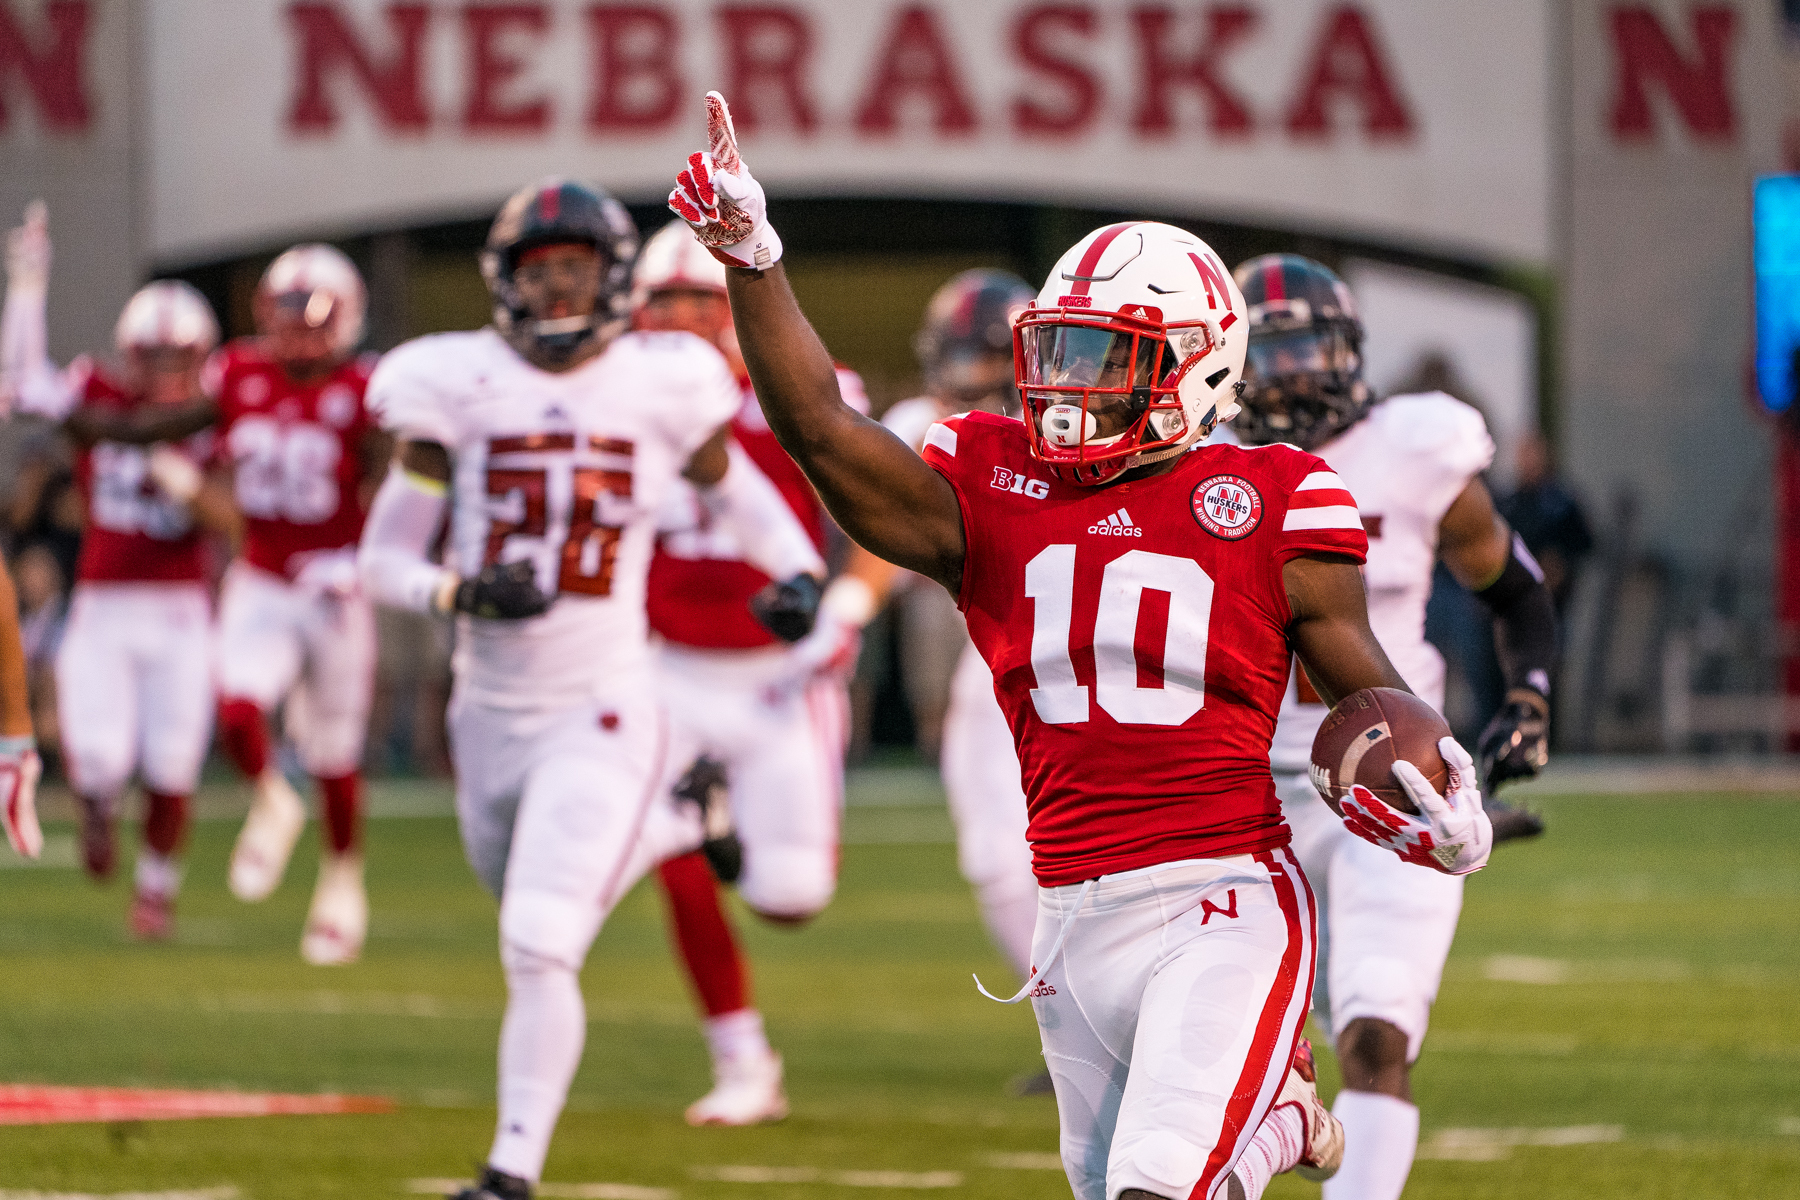 JD Spielman #10 of the Nebraska Cornhuskers returns a kickoff 99 yards on the first touch of his career during Nebraska's game against Arkansas State at Memorial Stadium on Sept. 2, 2017. Photo by Aaron Babcock, Hail Varsity